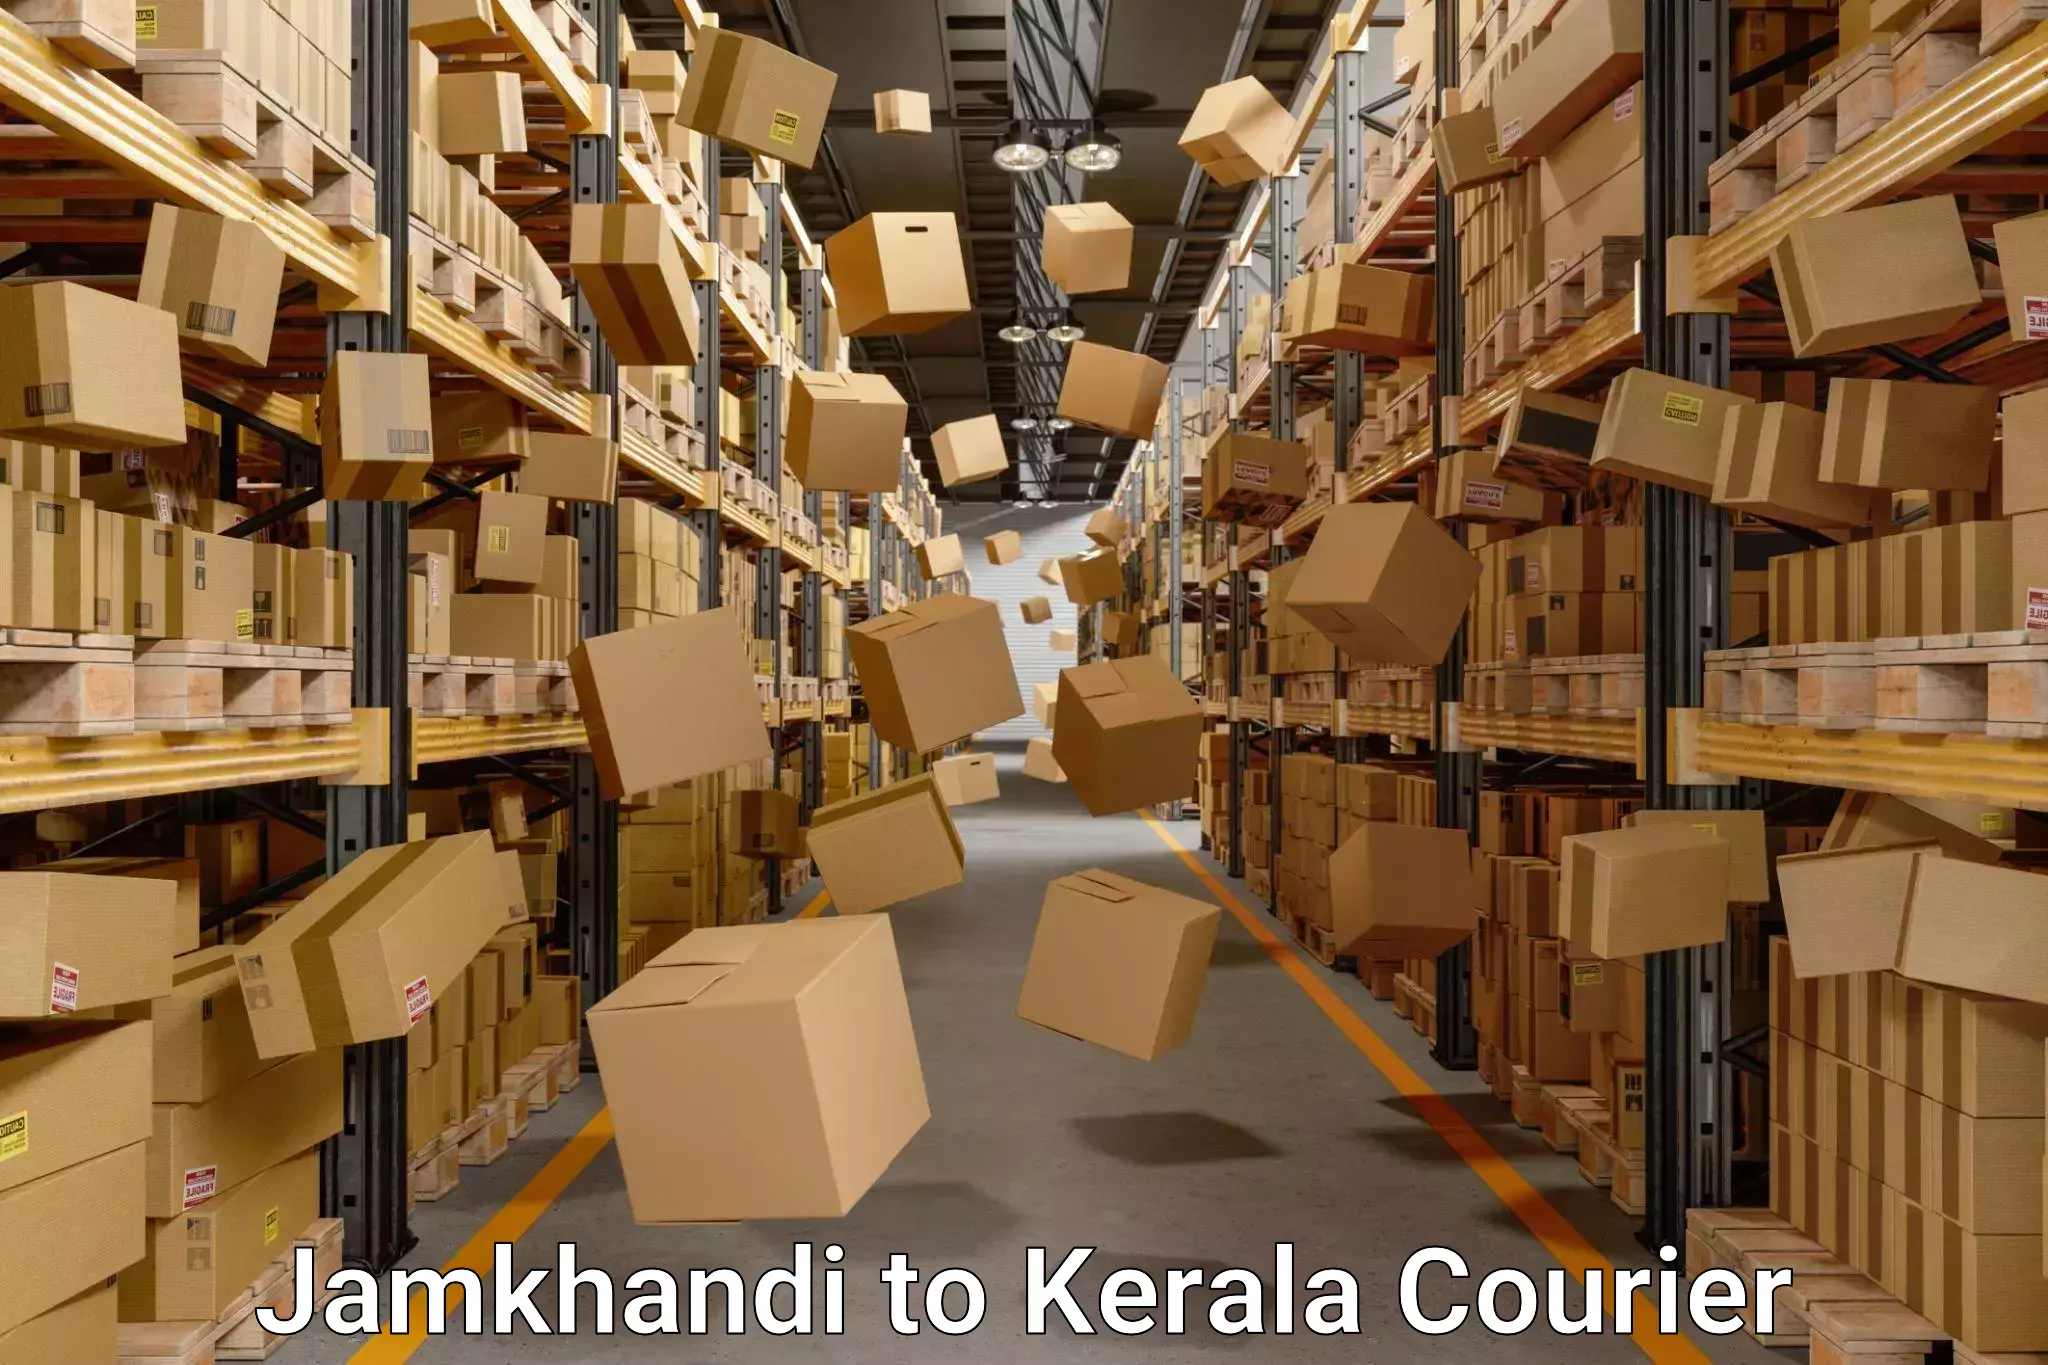 Dependable moving services in Jamkhandi to Koyilandy